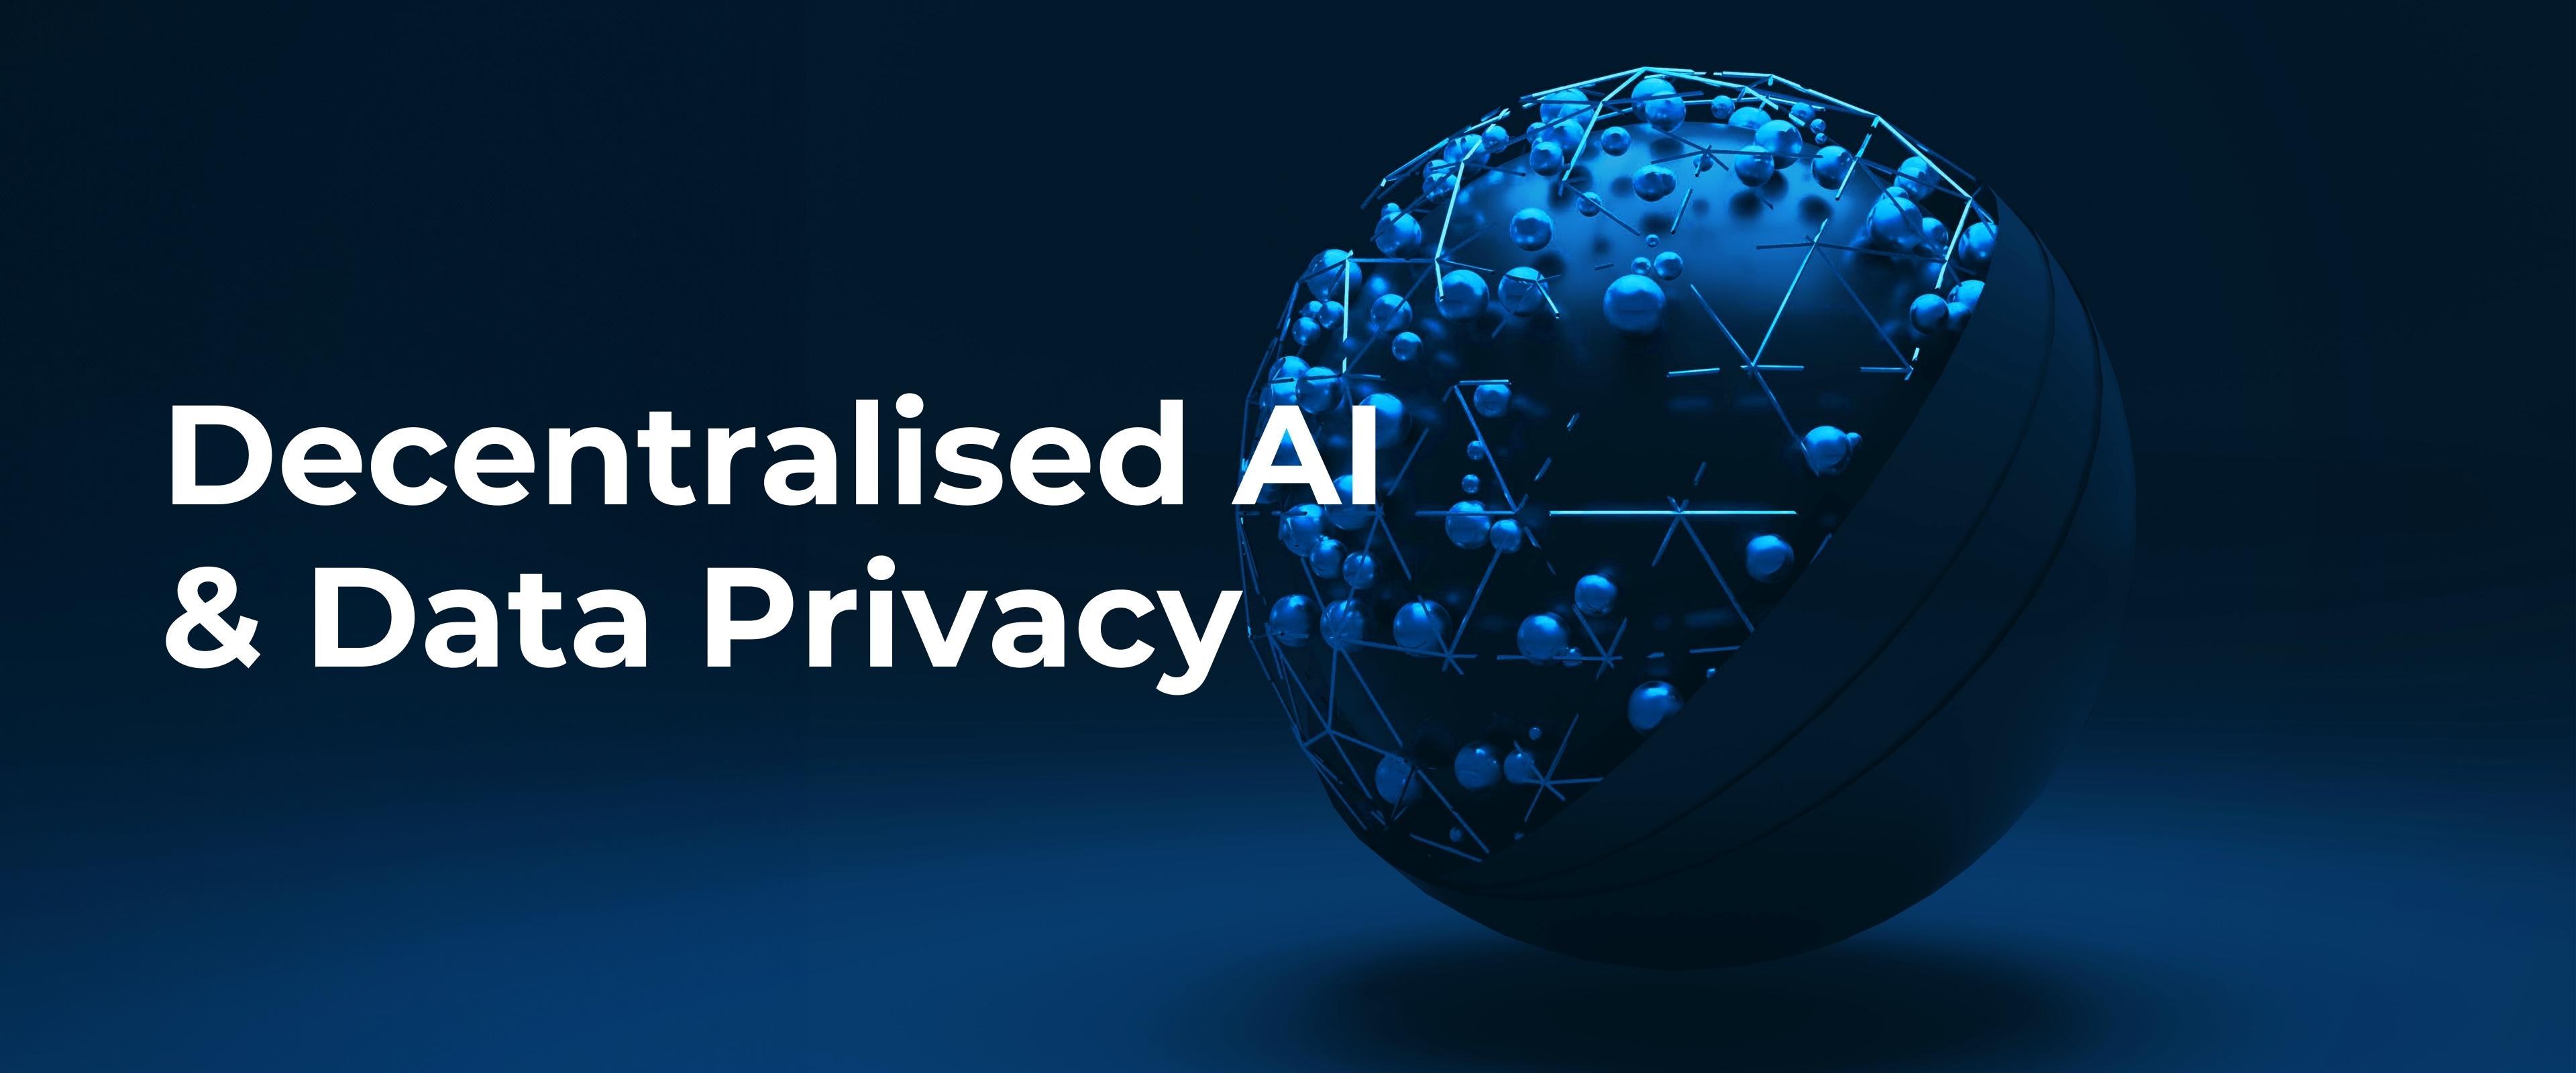 A glimpse into Decentralised AI and Data Privacy